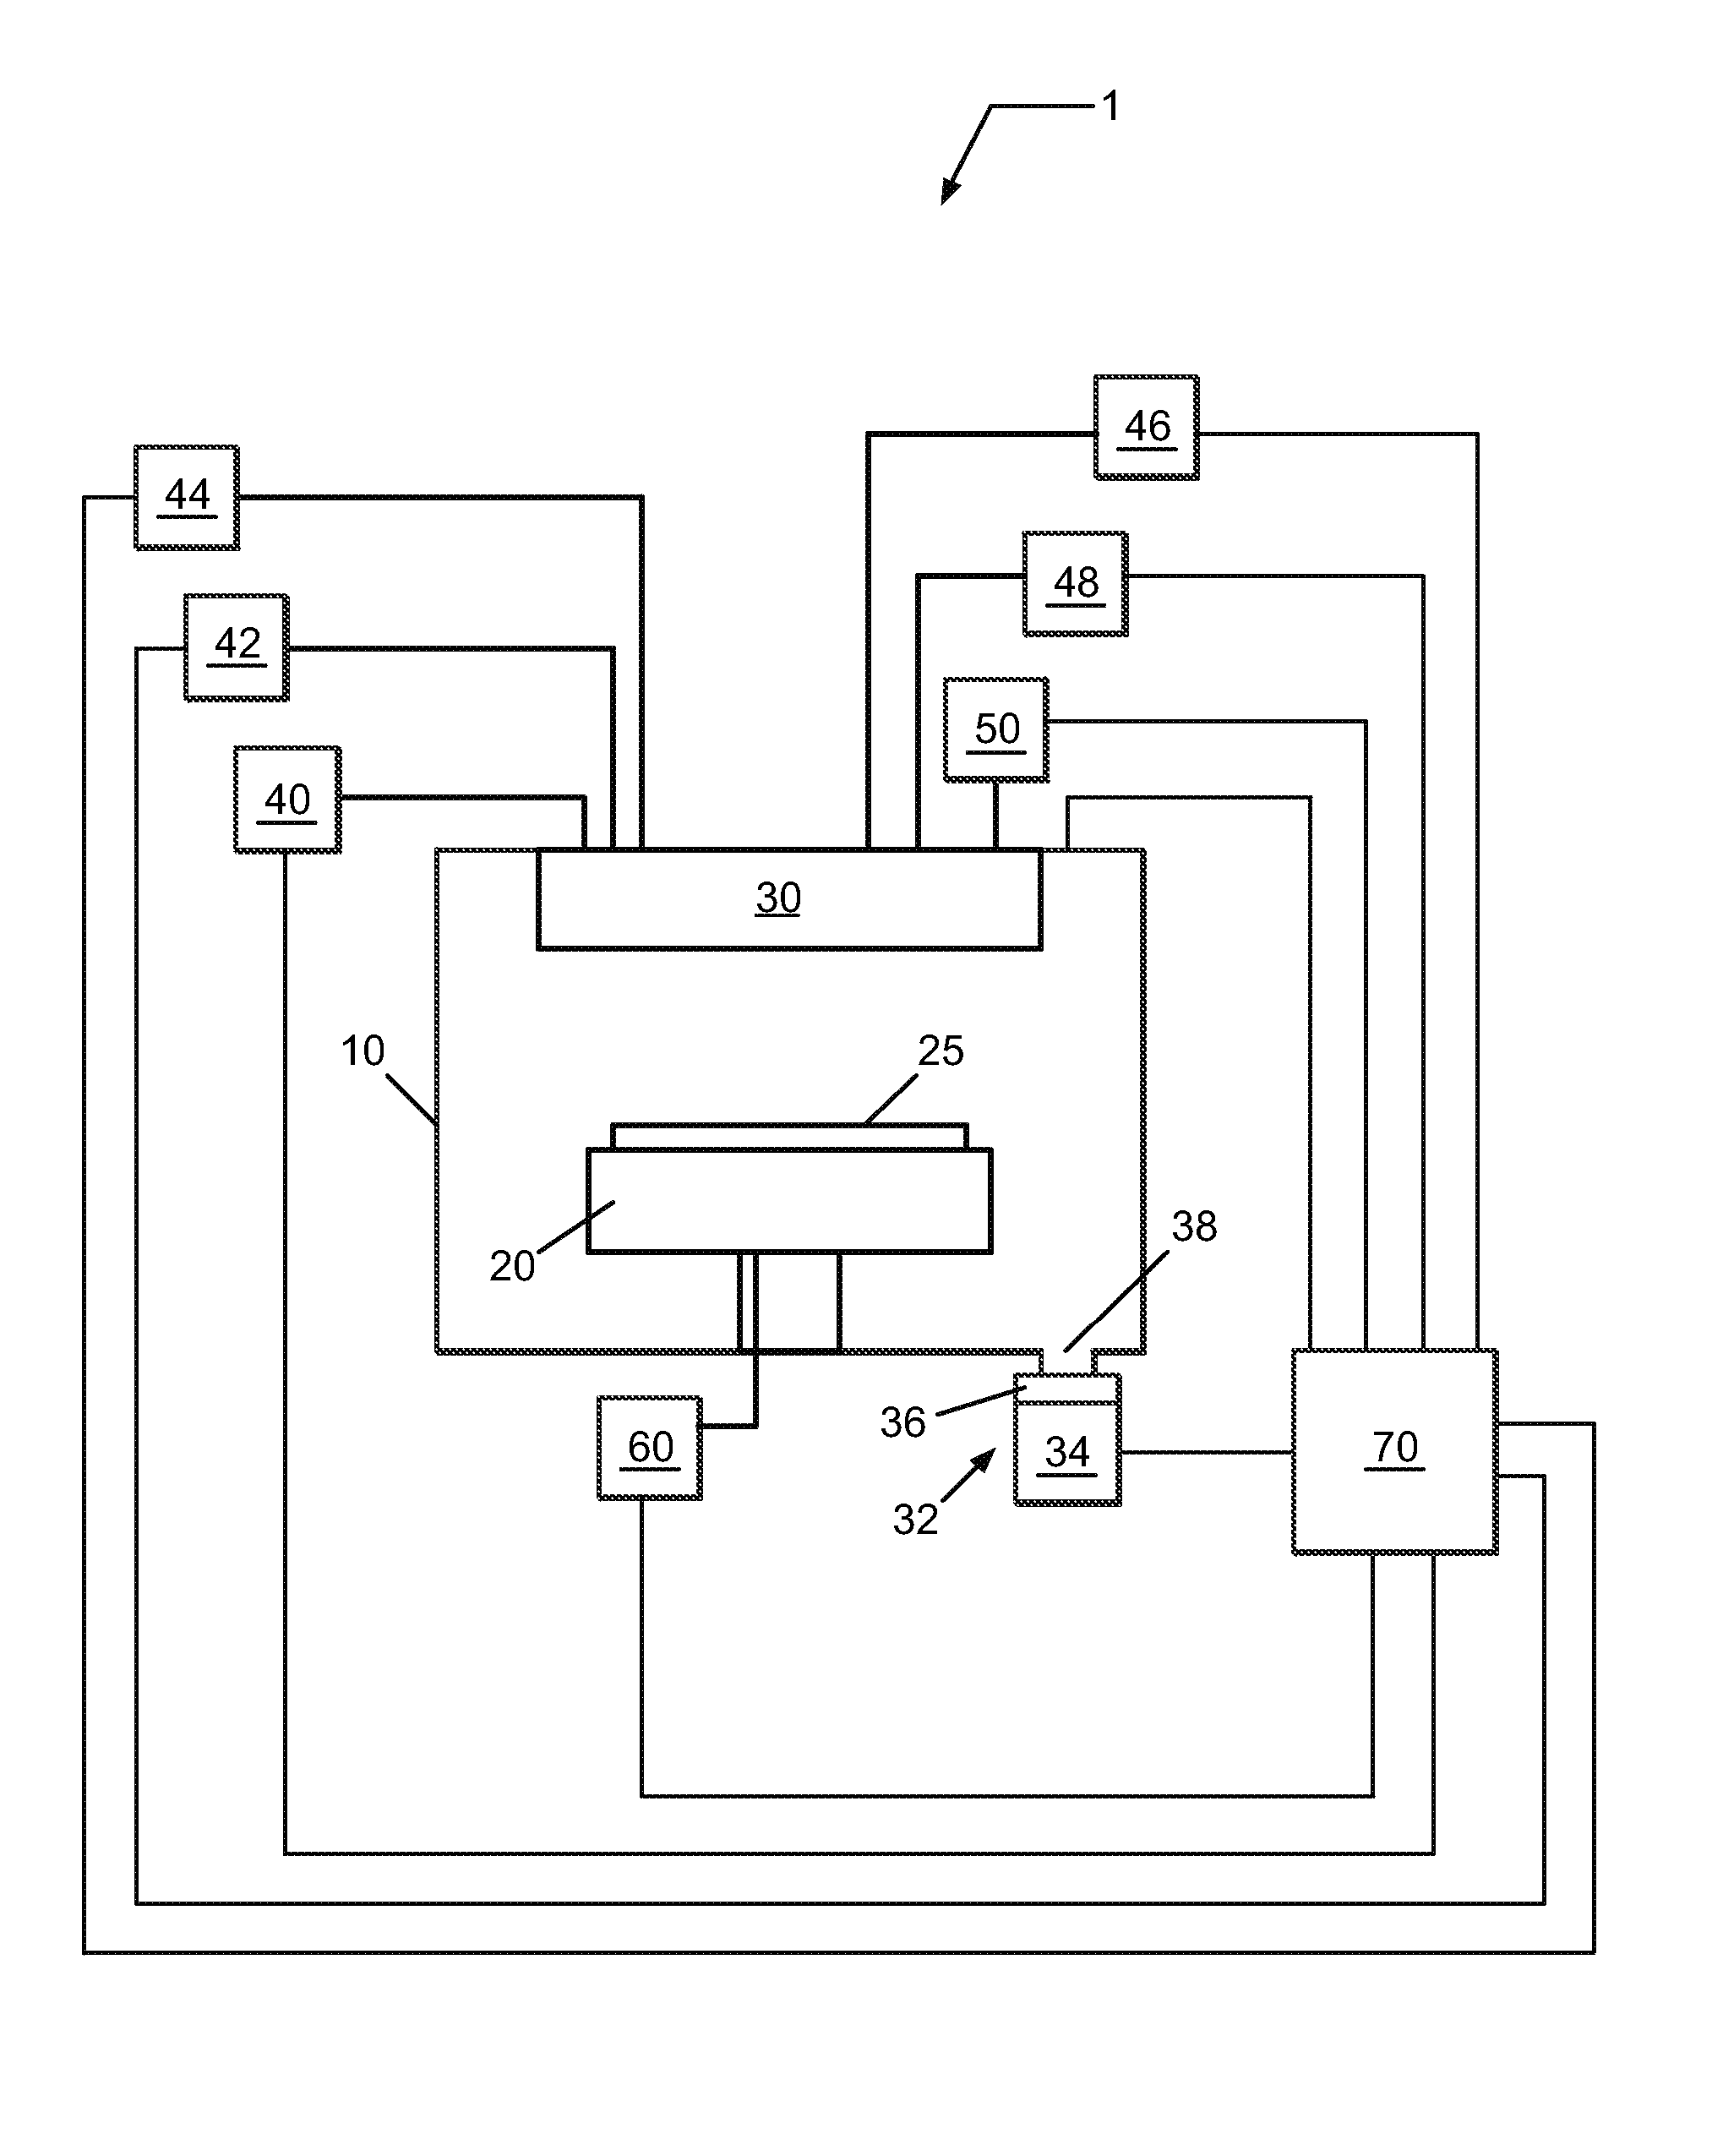 Method of forming mixed rare earth nitride and aluminum nitride films by atomic layer deposition